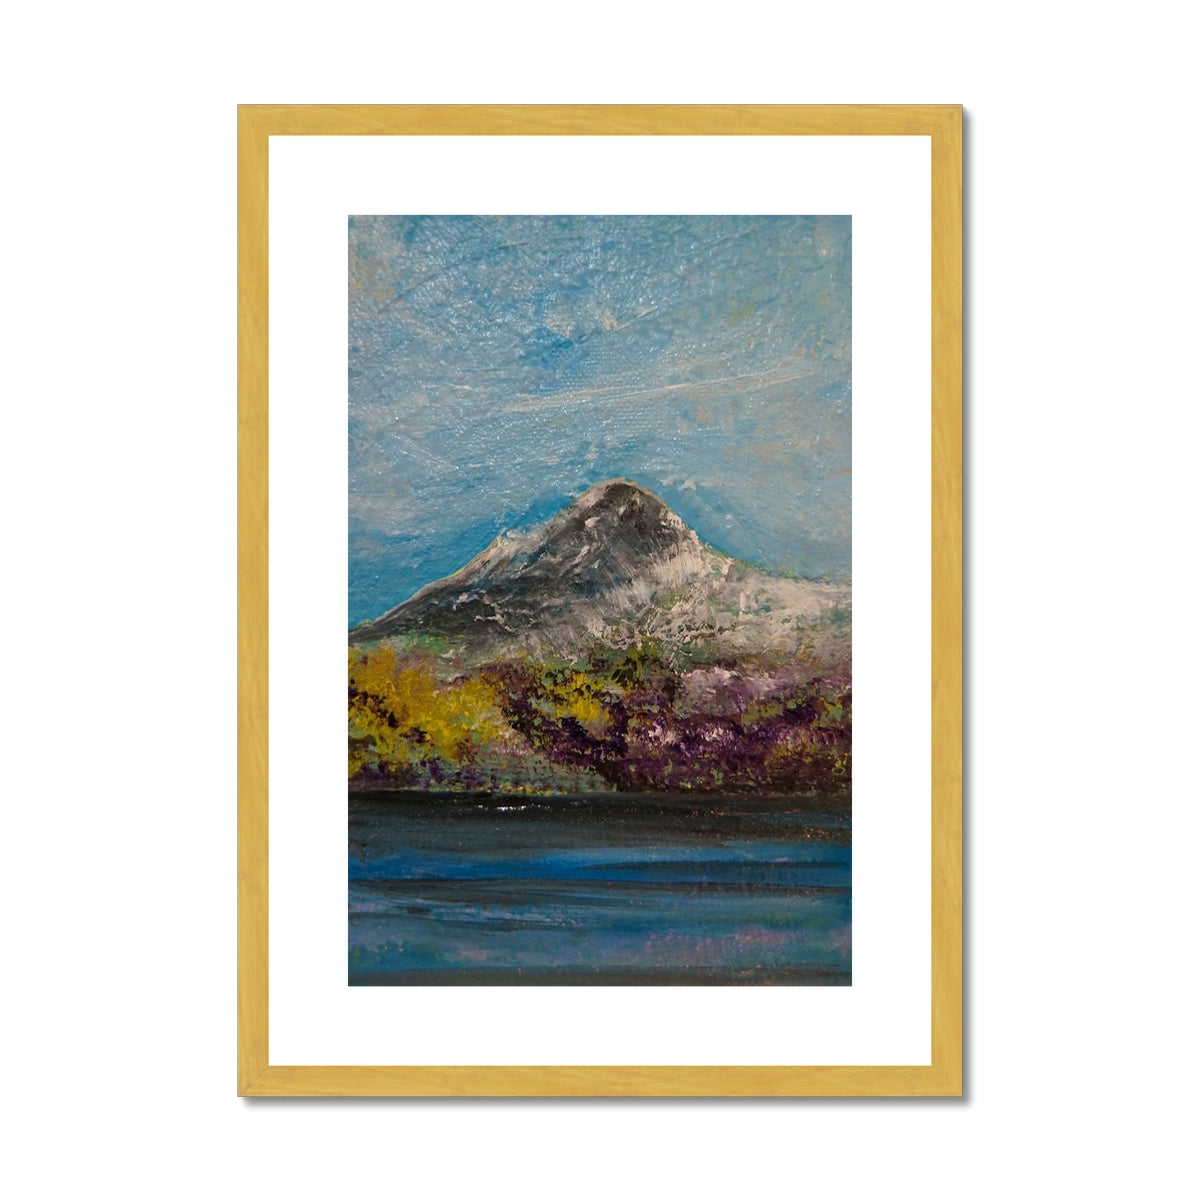 Ben Lomond ii Painting | Antique Framed & Mounted Prints From Scotland-Antique Framed & Mounted Prints-Scottish Lochs & Mountains Art Gallery-A2 Portrait-Gold Frame-Paintings, Prints, Homeware, Art Gifts From Scotland By Scottish Artist Kevin Hunter